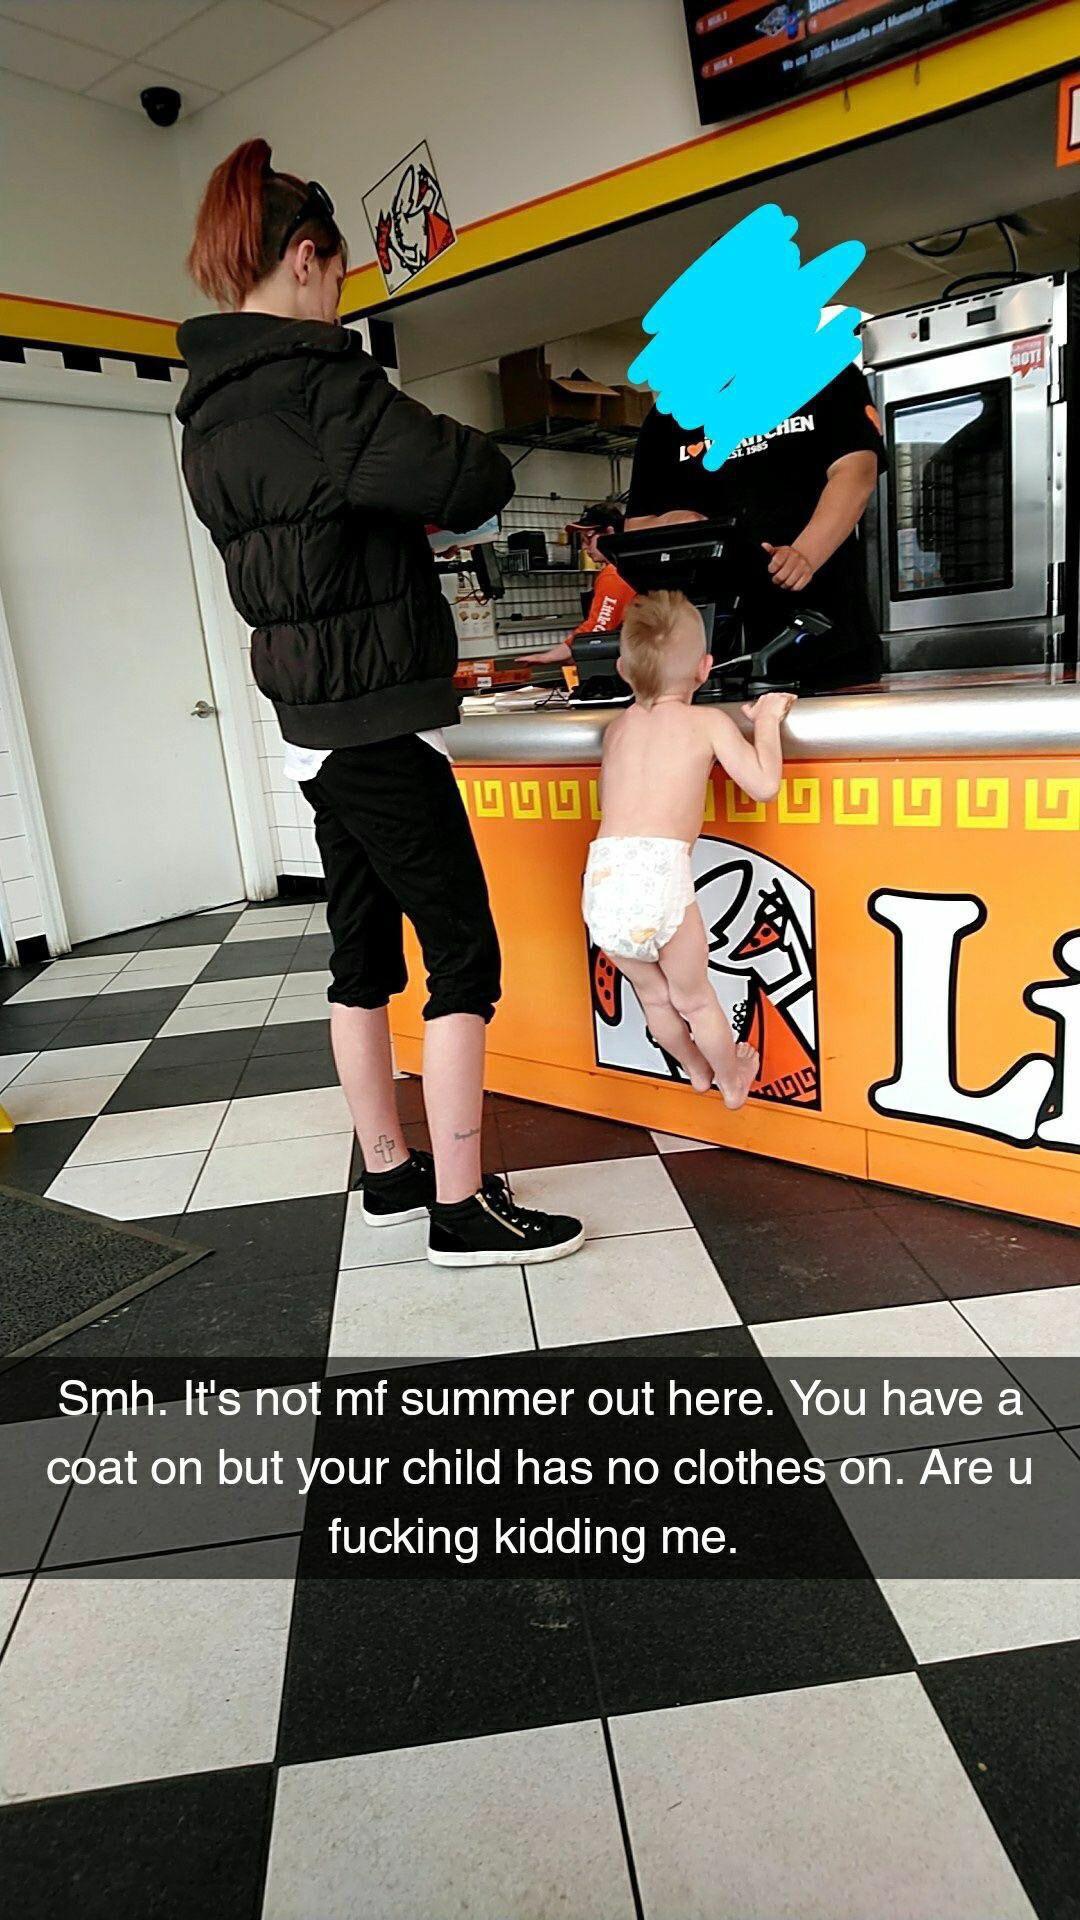 little caesars - Sehen Little 000 LOU000 Smh. It's not mf summer out here. You have a coat on but your child has no clothes on. Are u fucking kidding me.